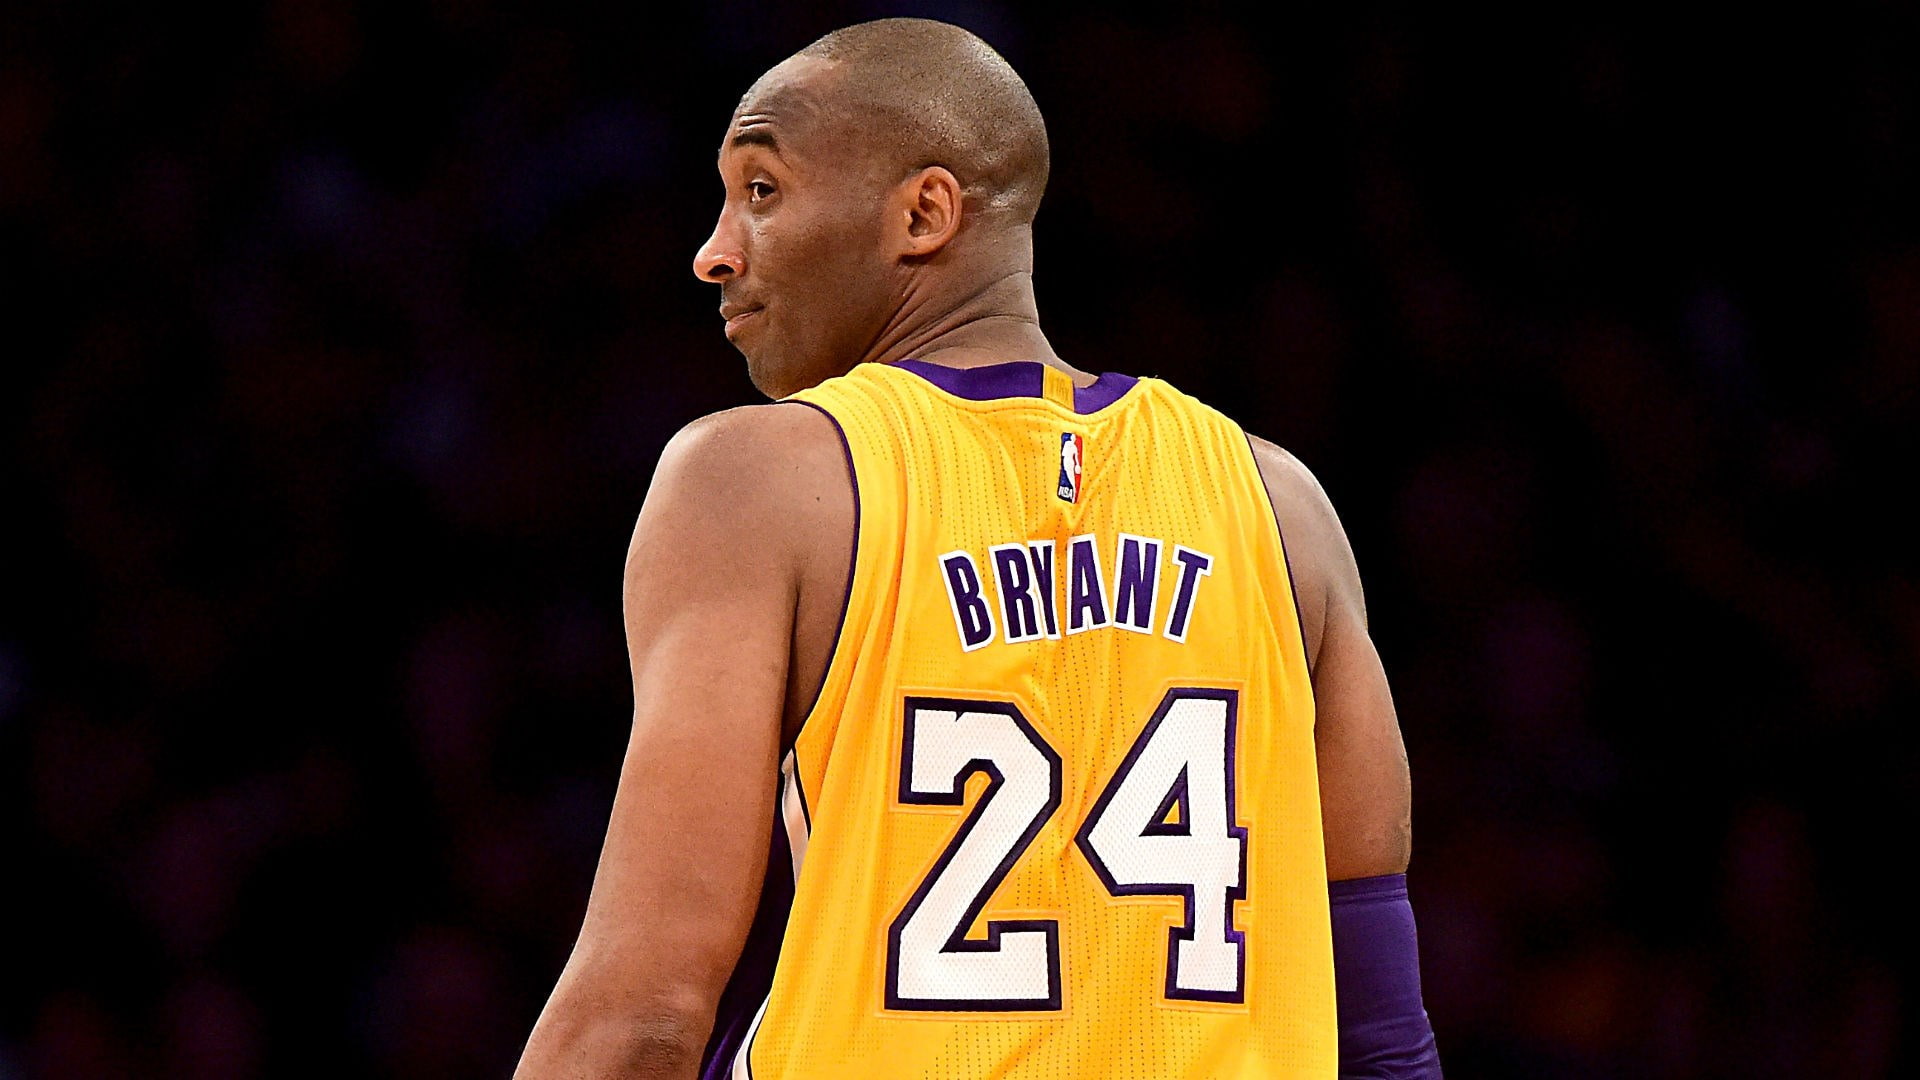 kobe bryant windows backgrounds, one person, adult, shaved head